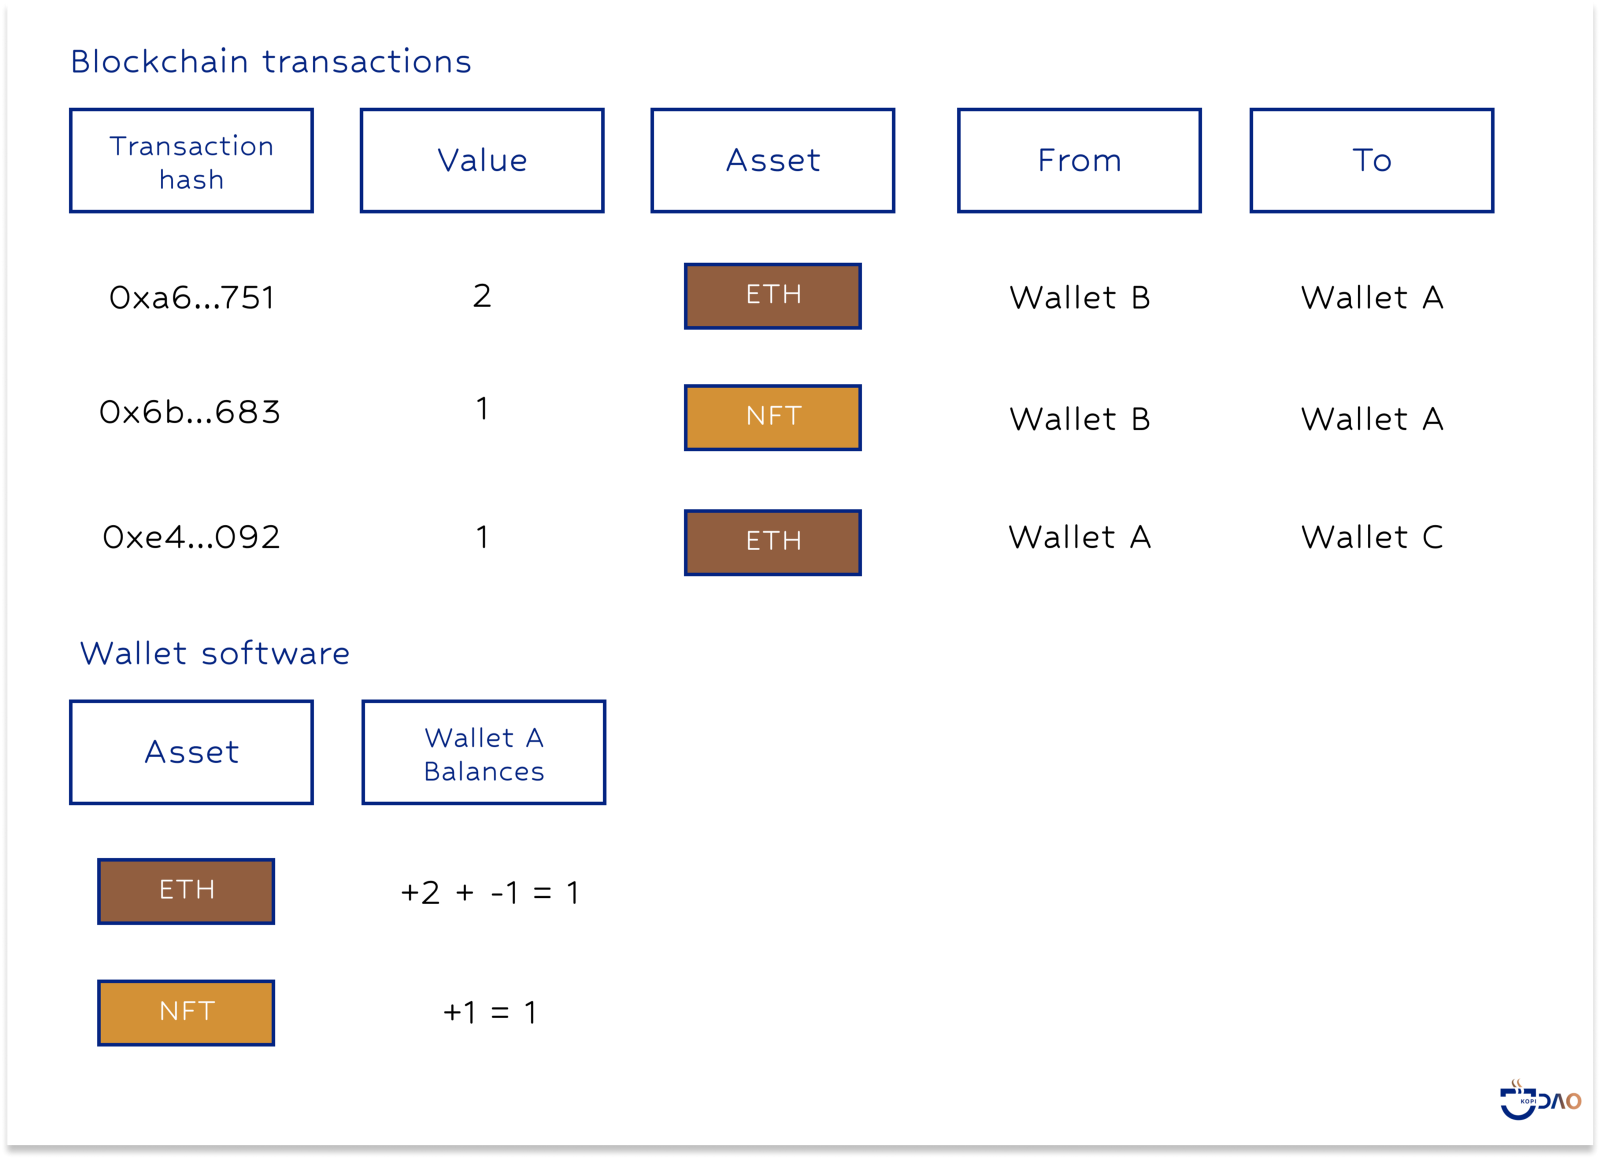 A very simplified example of how balances for Wallet A are calculated in its interactions with Wallet B and C.